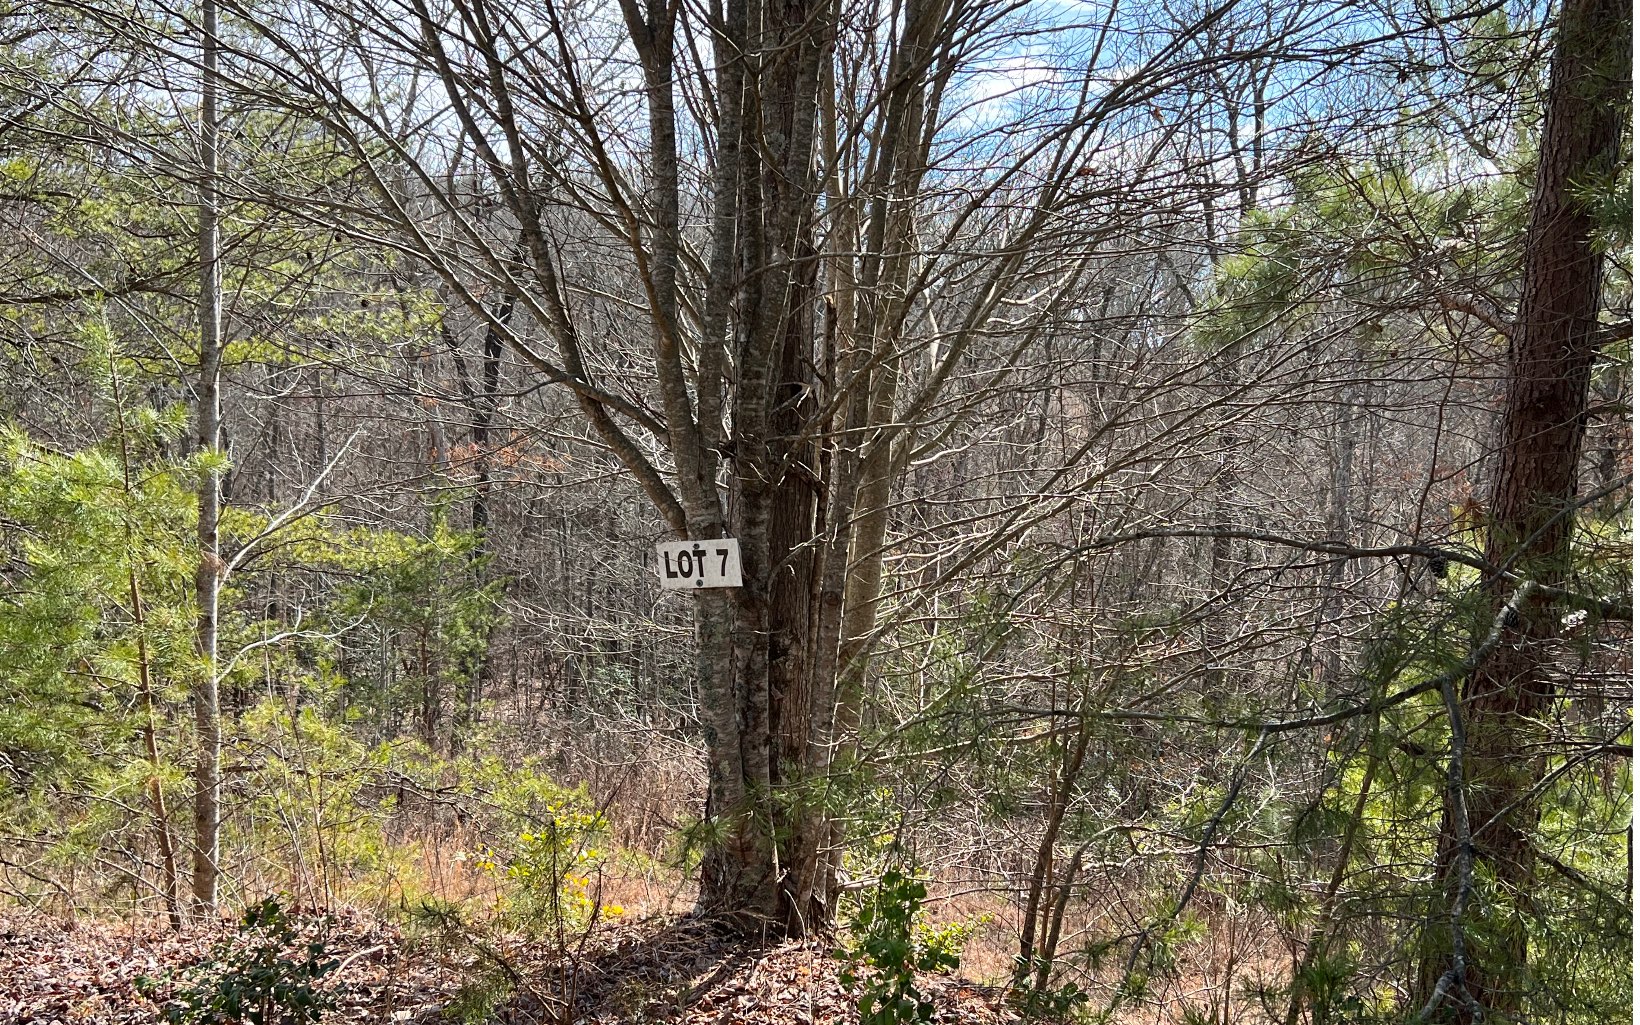 Affordable mountain home site. Great small community close to Blue Ridge on 1+ Acre lot close to kayaking on the Toccoa or great free concerts at Horseshoe Bend Park or how about the shopping and restaurants at the twin cities of downtown McCaysville GA and Copperhill, TN. Add another acre buying the adjoining lot that can make this over 2+ acres. Driveway already cut in with a great building spot cleared and ready. Nice creek bordering the back side of property on both lots 7 & 8. County water, power and internet available. Call agent to see. Covenants Maybe Expired, Check county for proof.